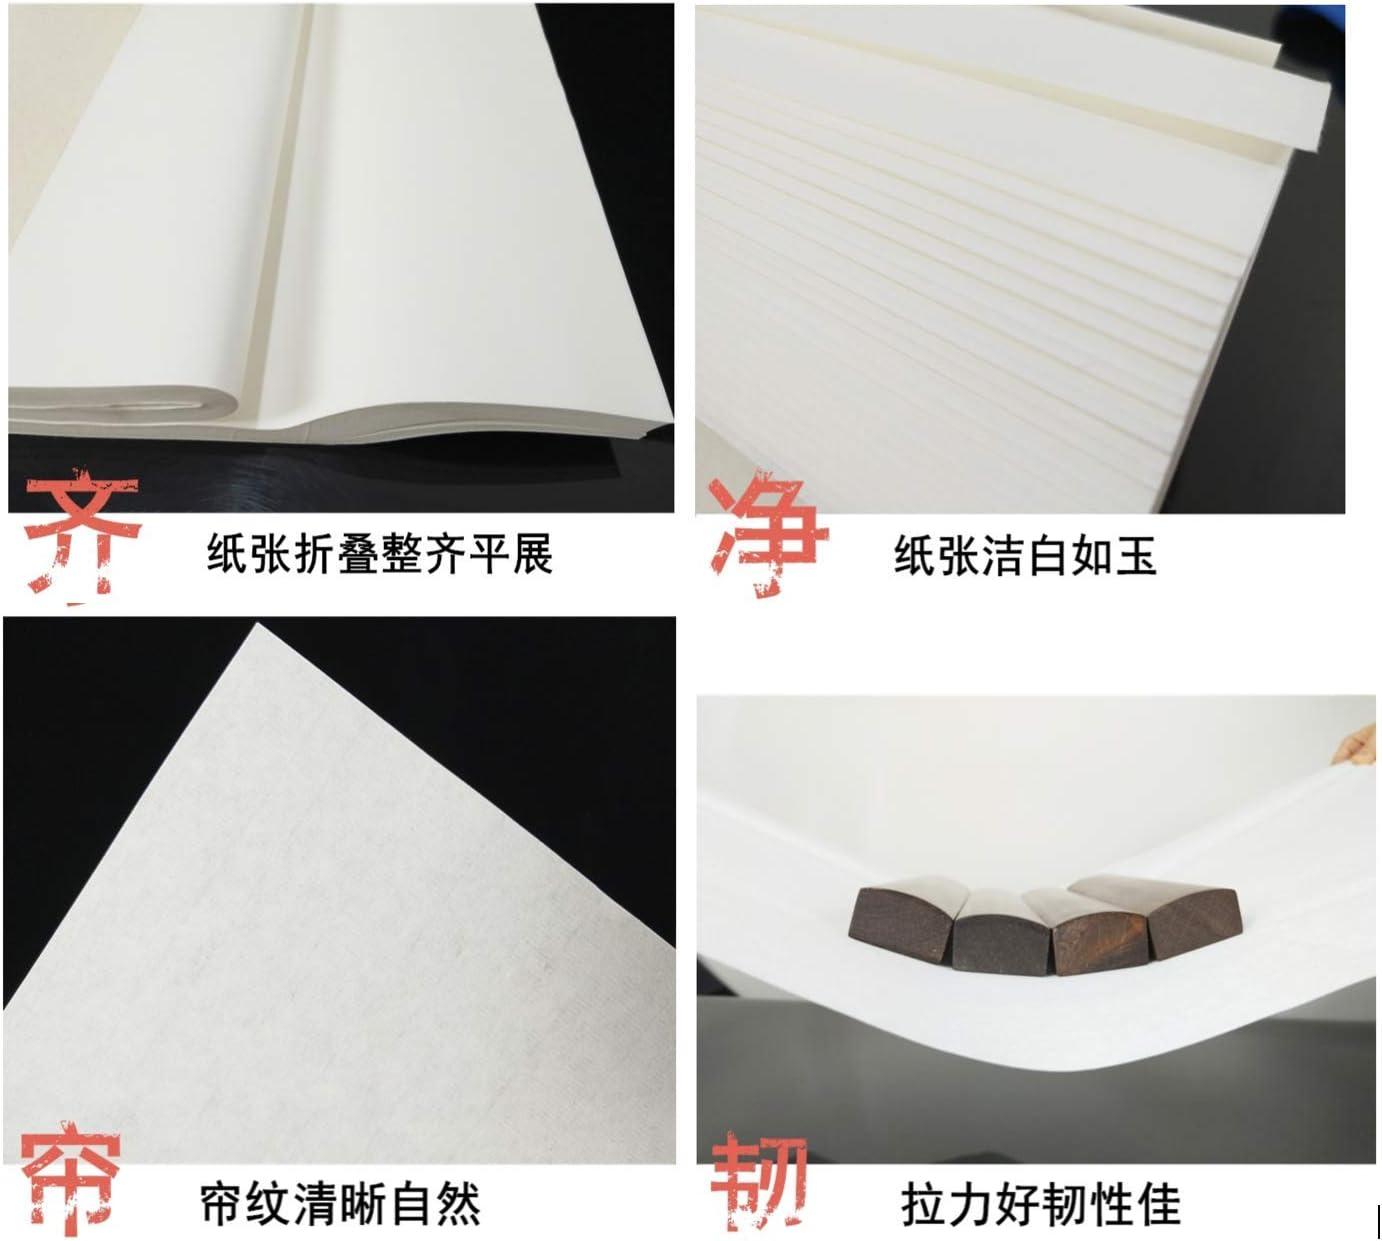 Rice Paper, The Best Surface For Japanese Ink Painting And Calligraphy